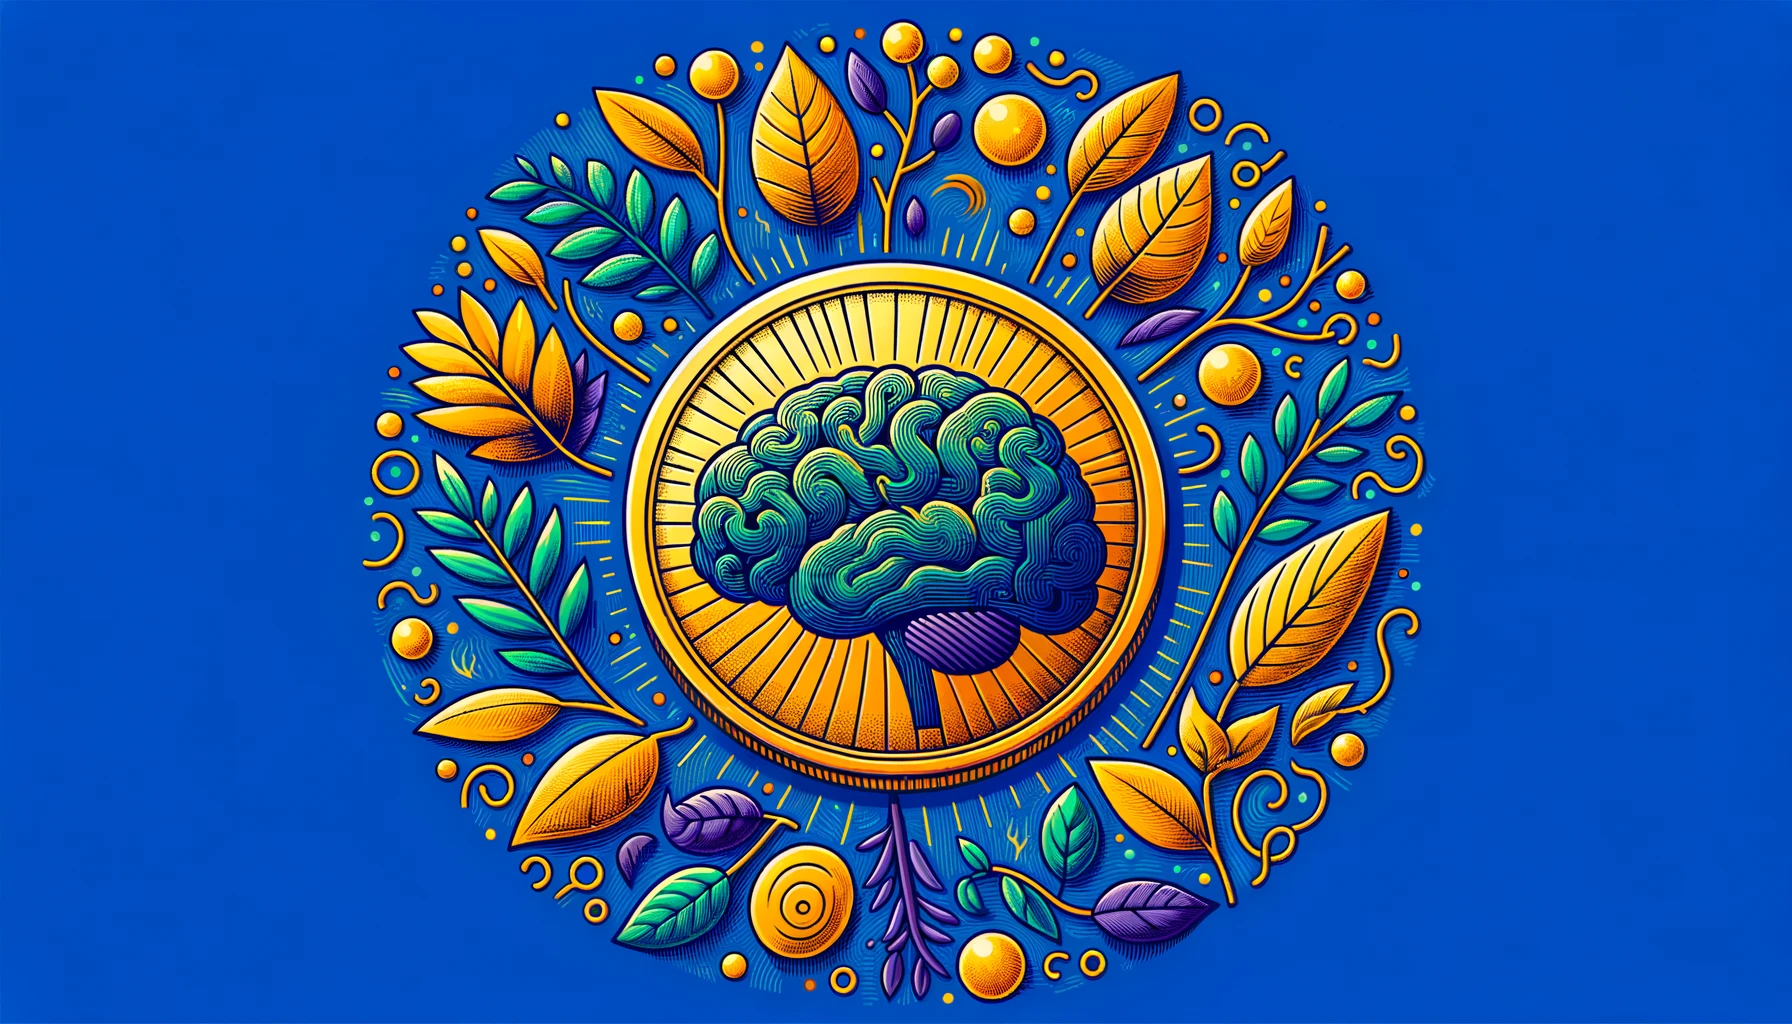 ai tokens cover - brain emblem coin and plants